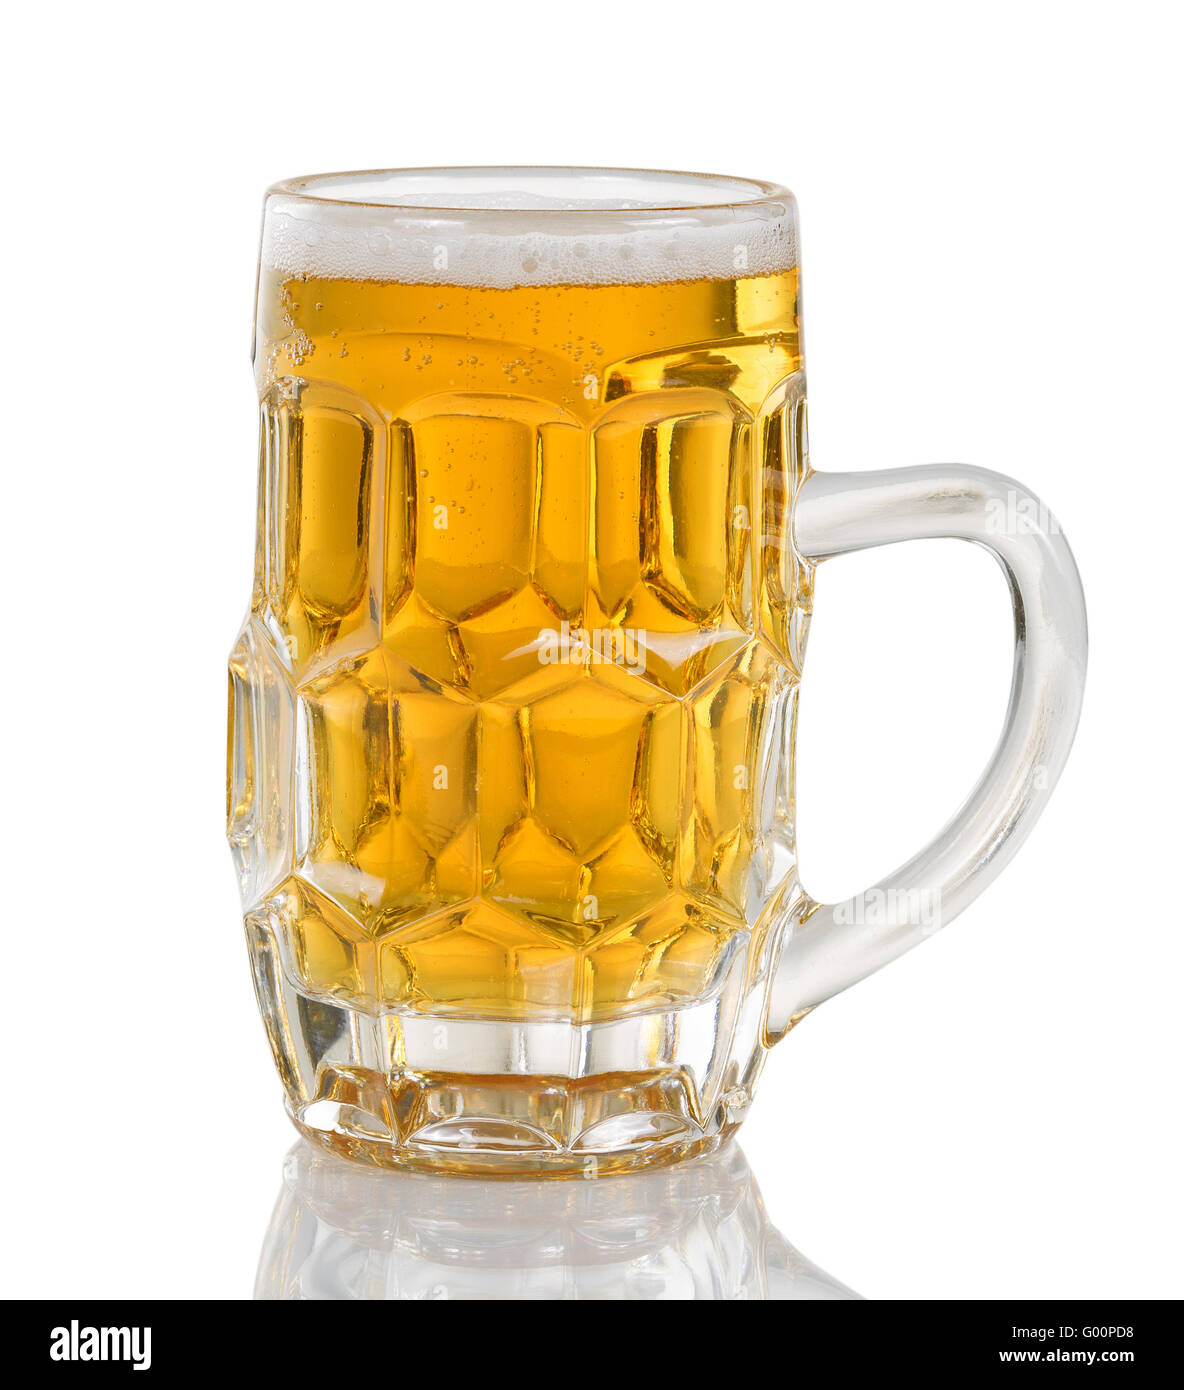 Freshly poured golden beer ready to drink Stock Photo